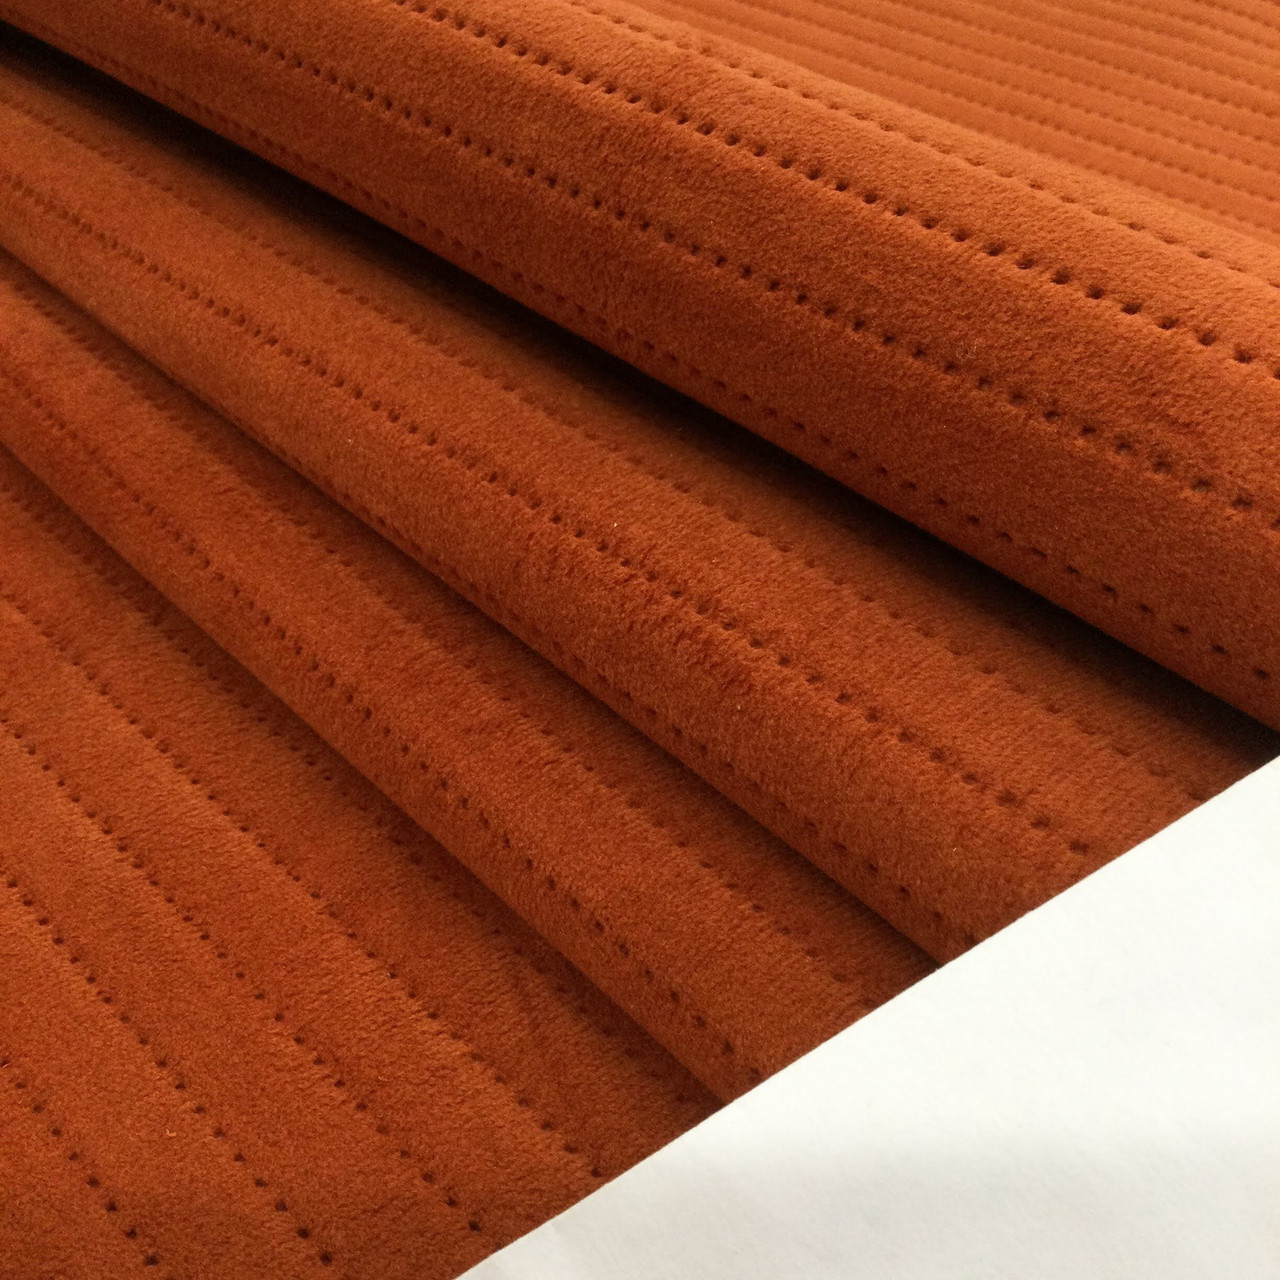 Stitched Stripes in Dark Orange | Pre Quilted Microfiber Fabric | Ultra  Heavy Weight Upholstery | 54 Wide | By the Yard | High Street Persimmon